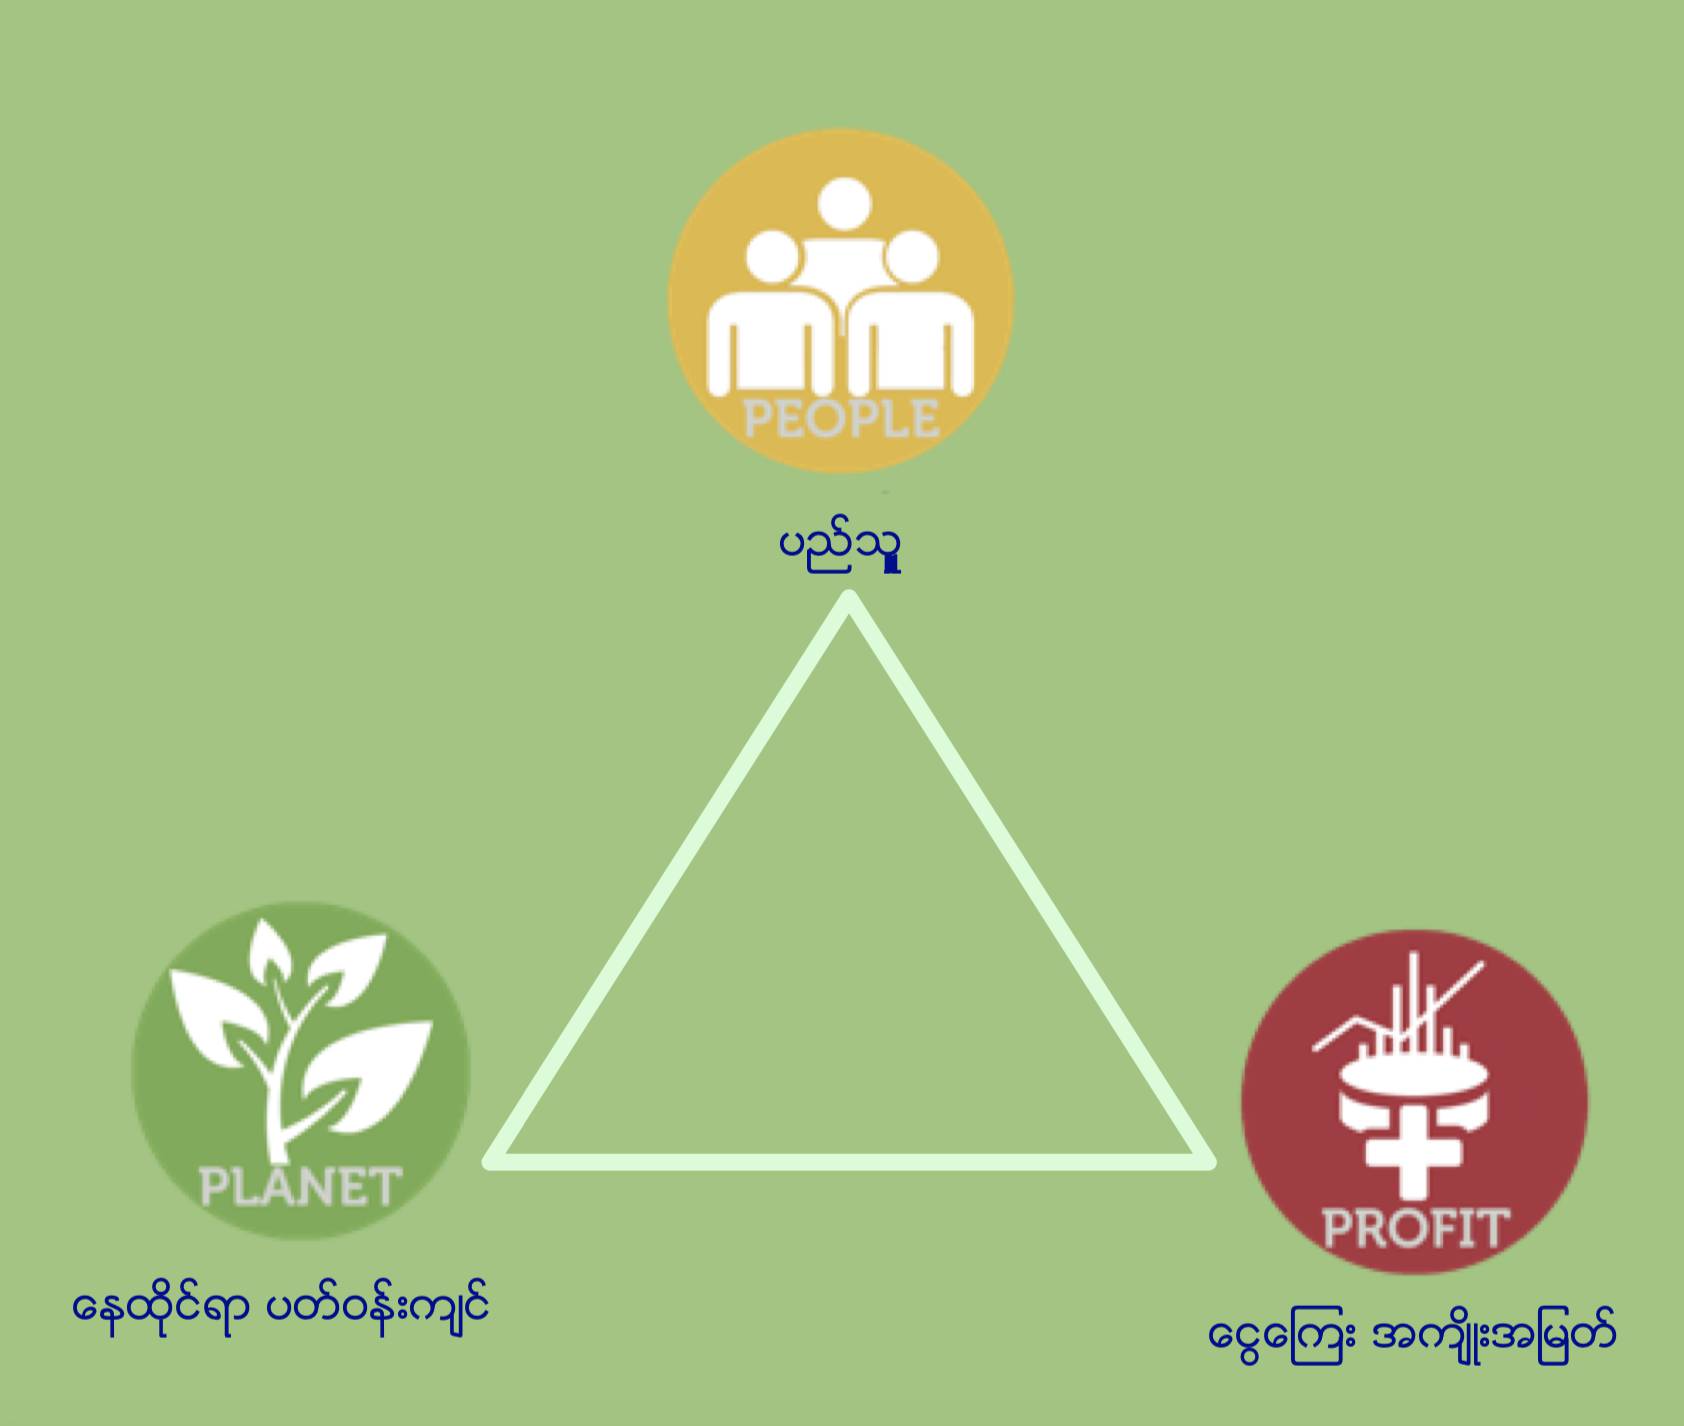 Connecting the Dots: Corporate Social Responsibility in Myanmar, A Win-Win Solution for Business and Society